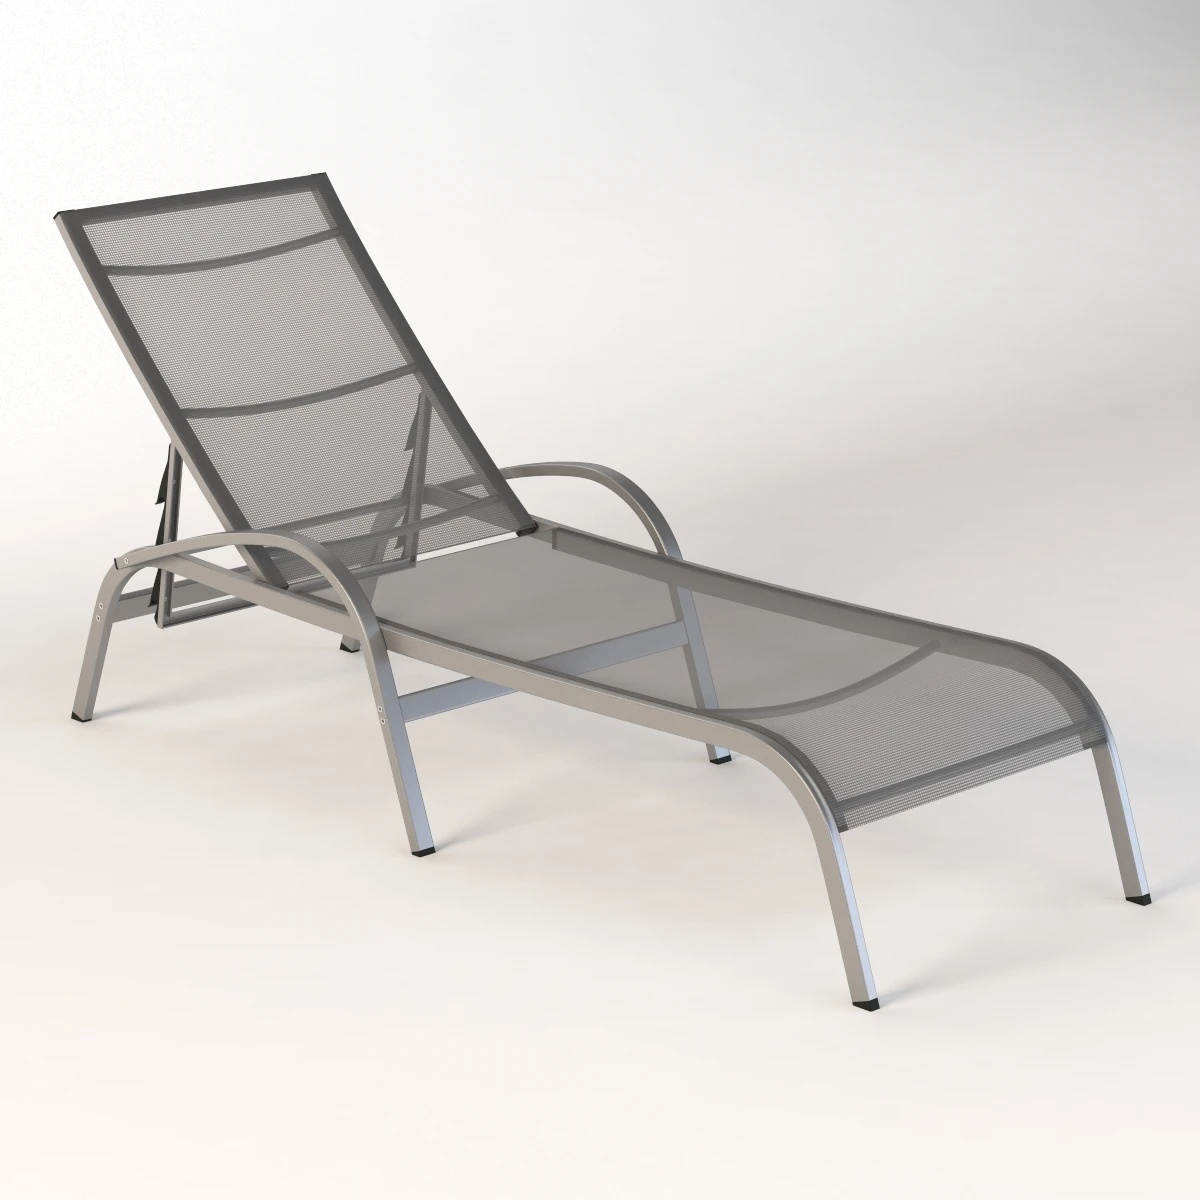 Collection of Four Modern Sun Lounger 3D Day Bed Models 3D Model_03